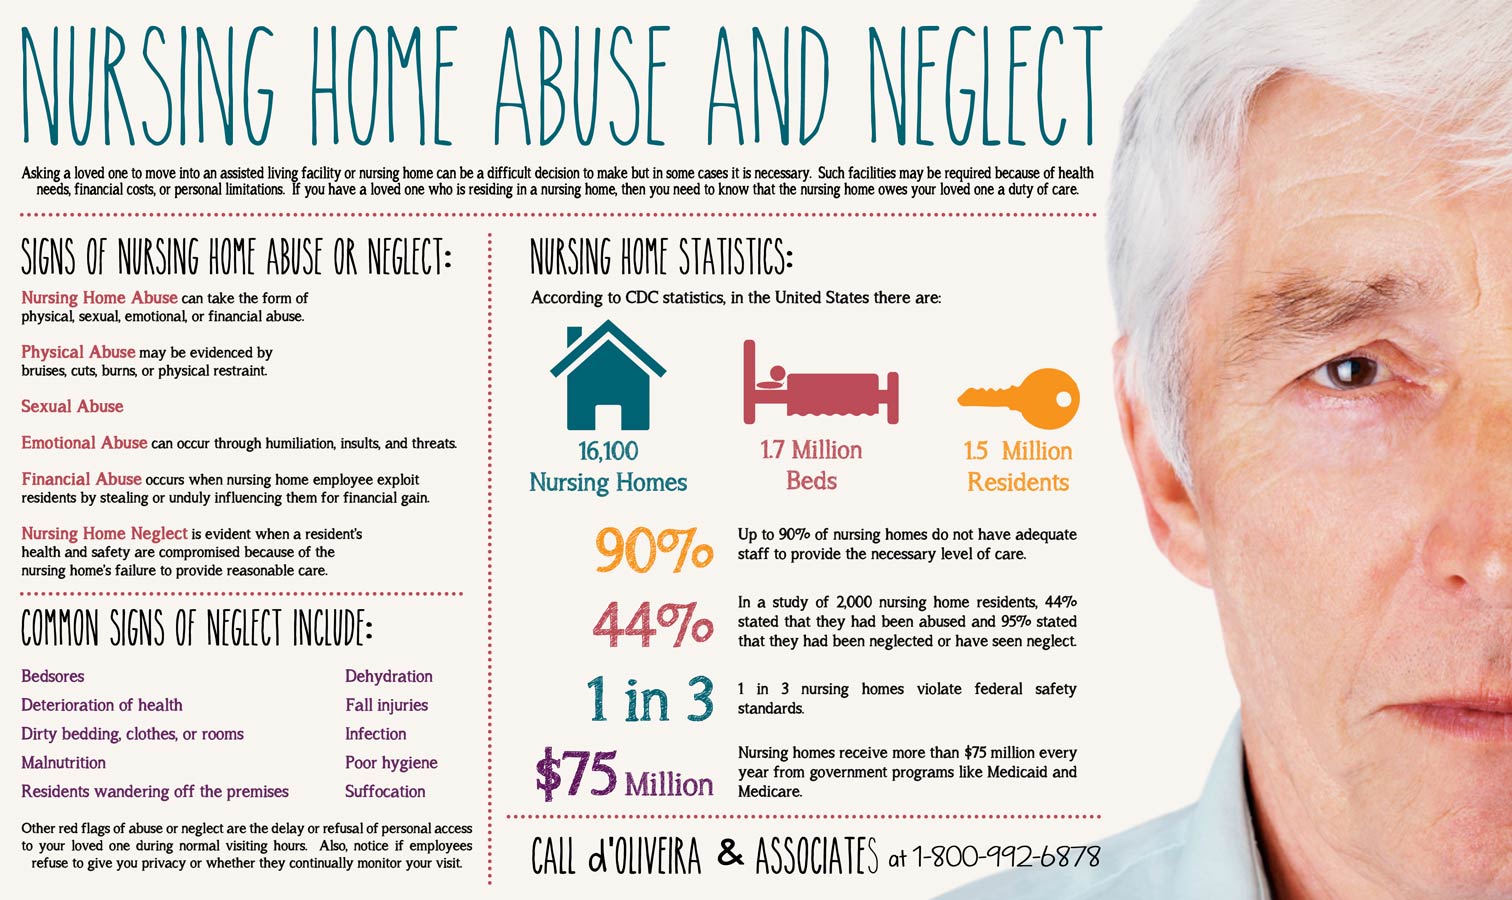 Nursing Home Abuse and Neglect and Signs of Nursing Home Abuse Infographic